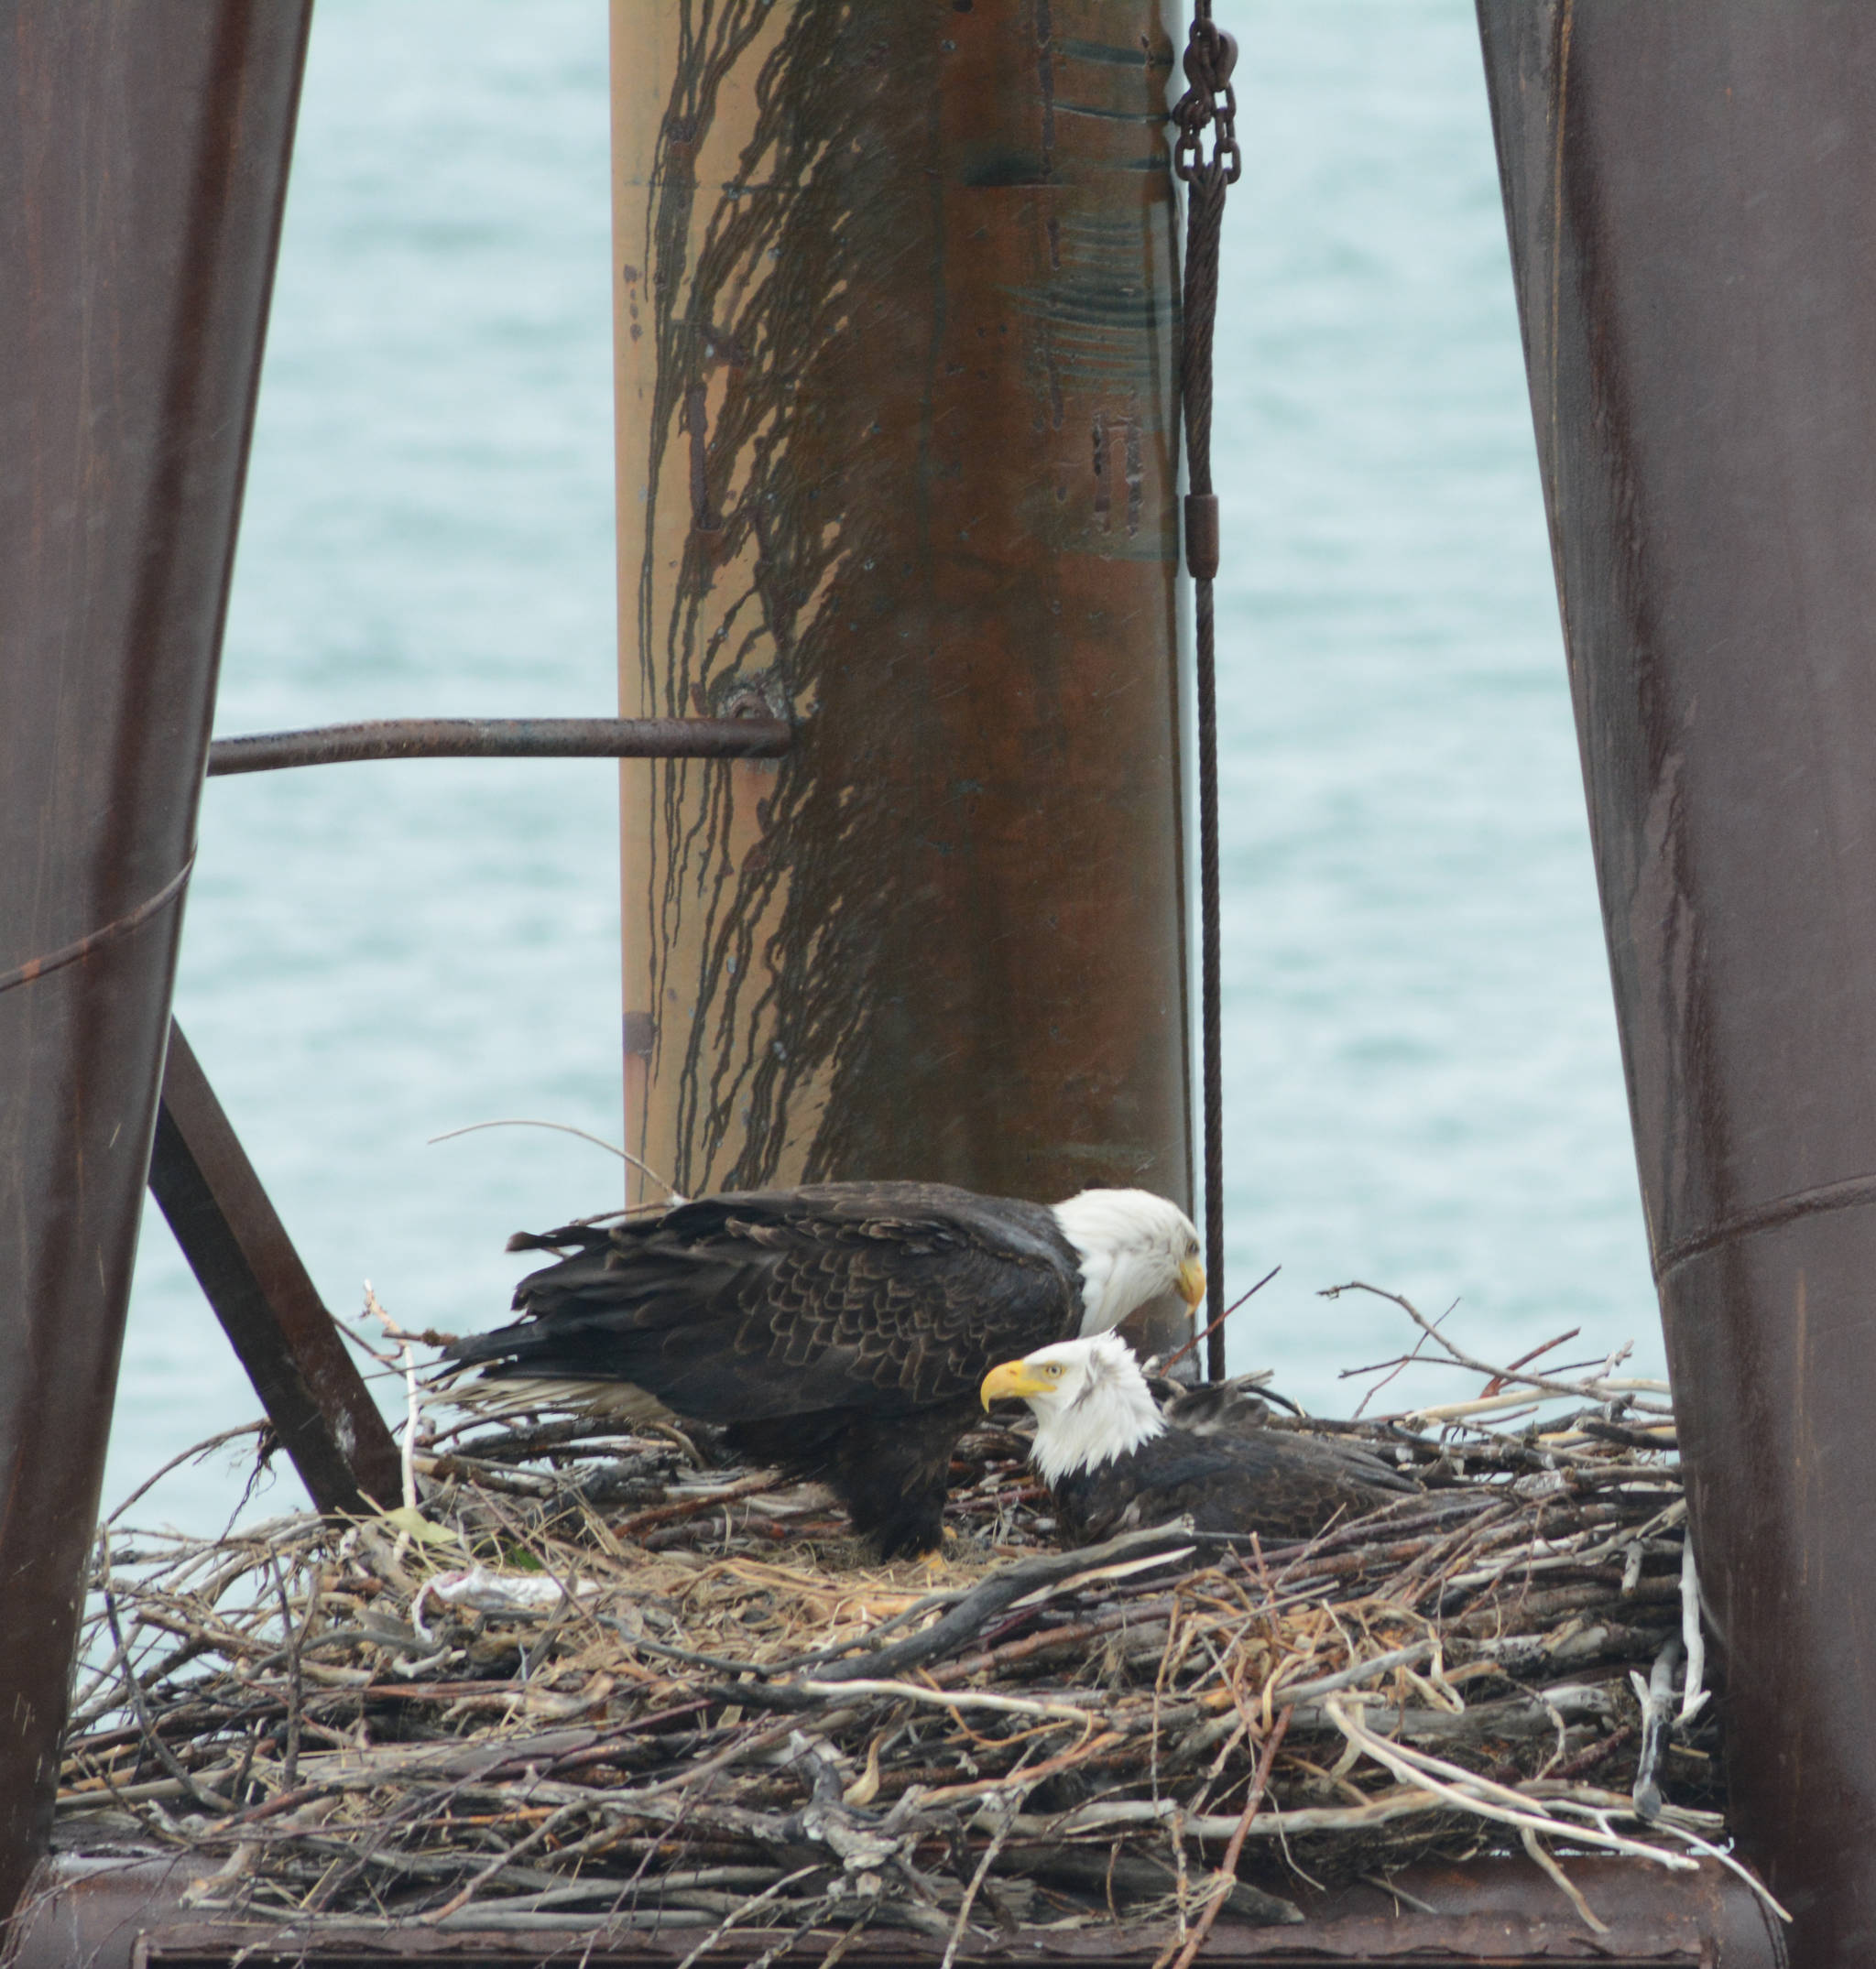 Two bald eagles sit on a nest they built on an unused dolphin off the Homer, Alaska, Spit last Friday, June 15, 2018. At least one eagle chick has been seen in the nest. (Photo by Michael Armstrong/Homer News)